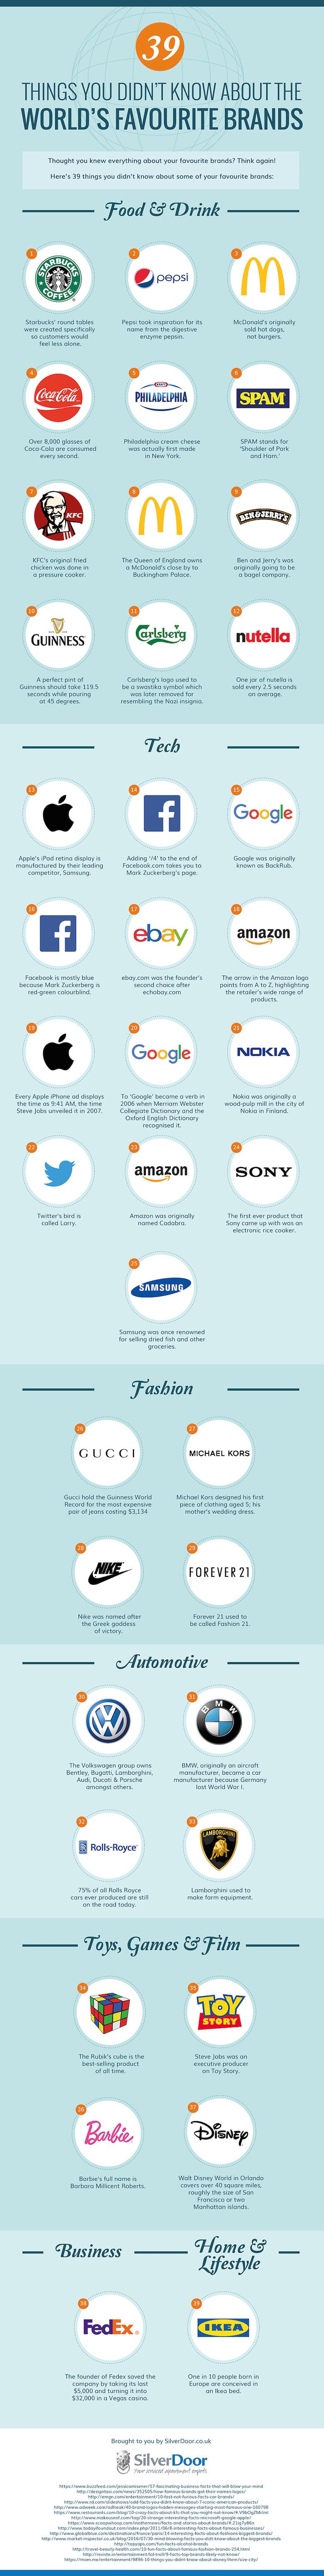 39 Things You Didn't Know About The World's Favourite Brands